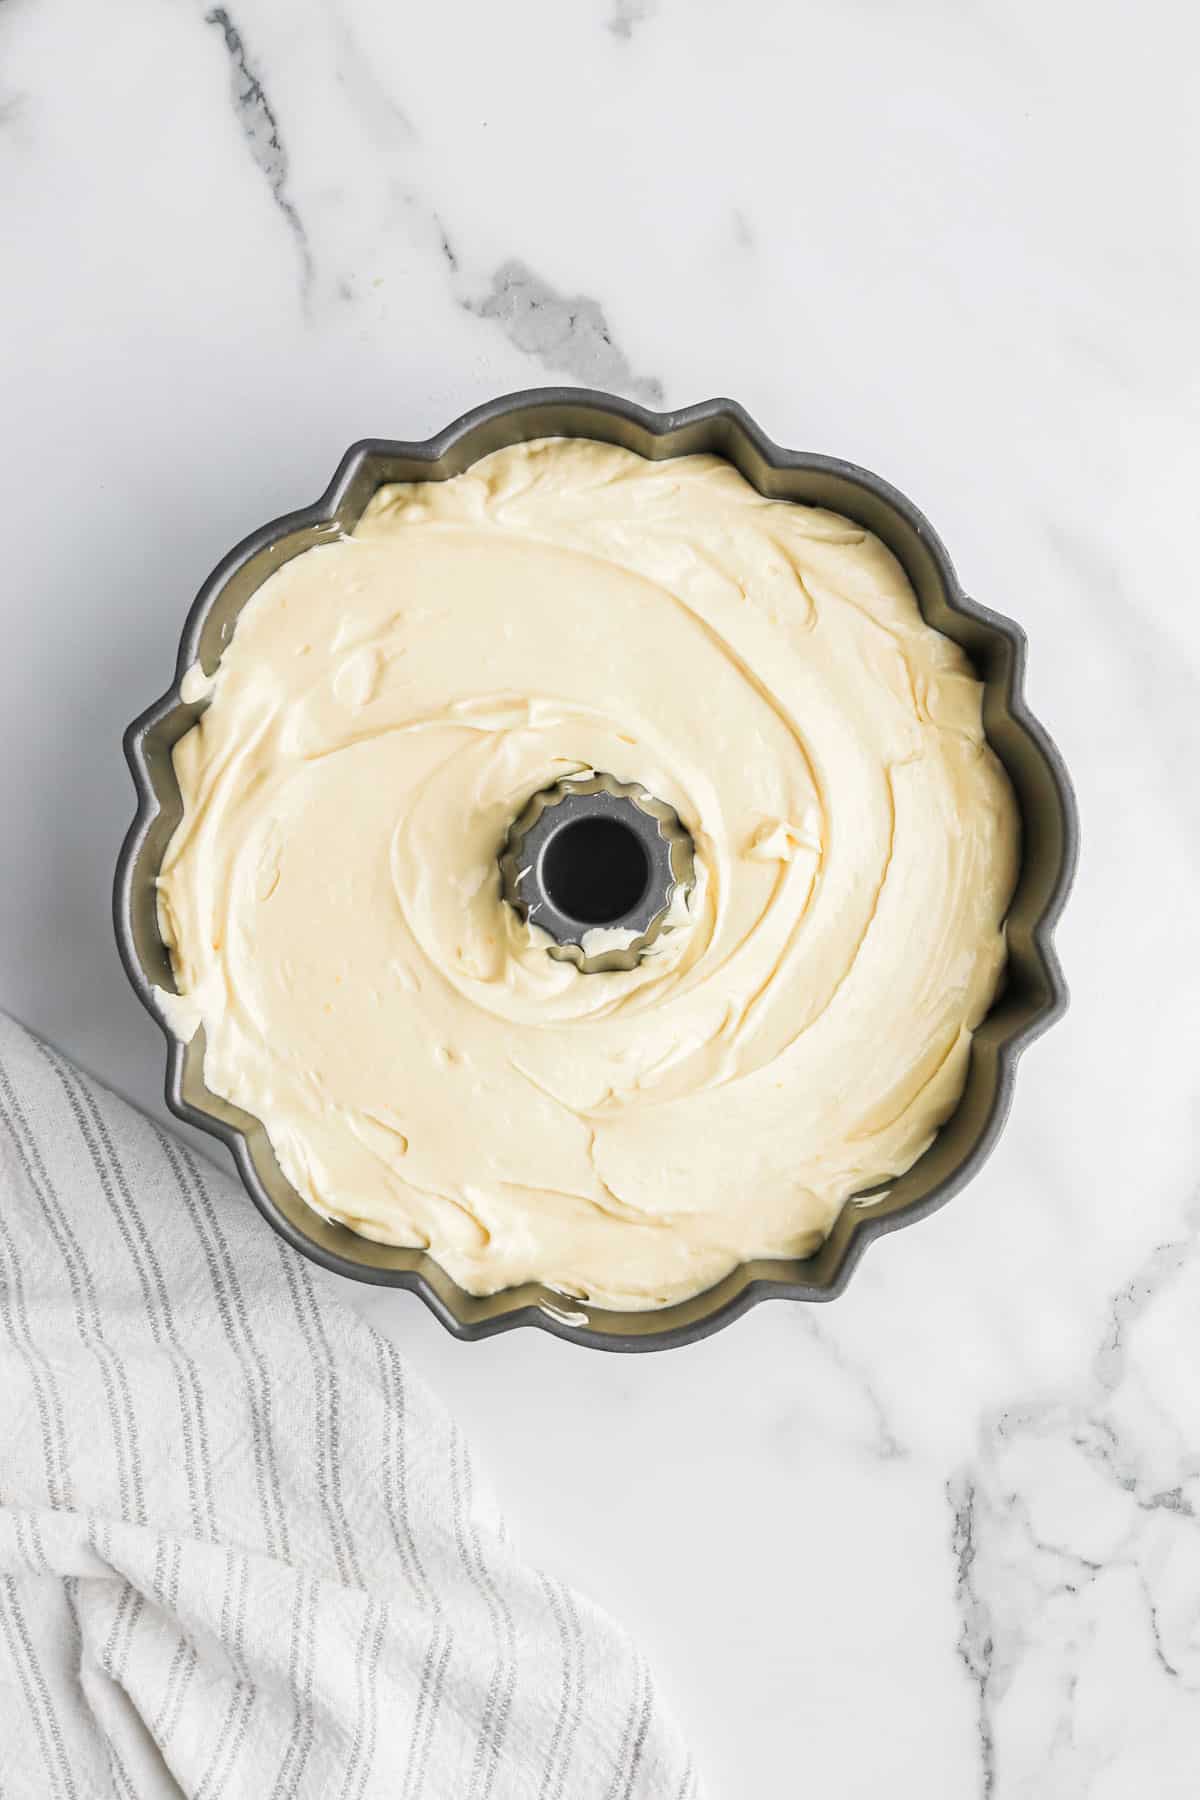 Cream cheese pound cake batter poured into a bundt pan.